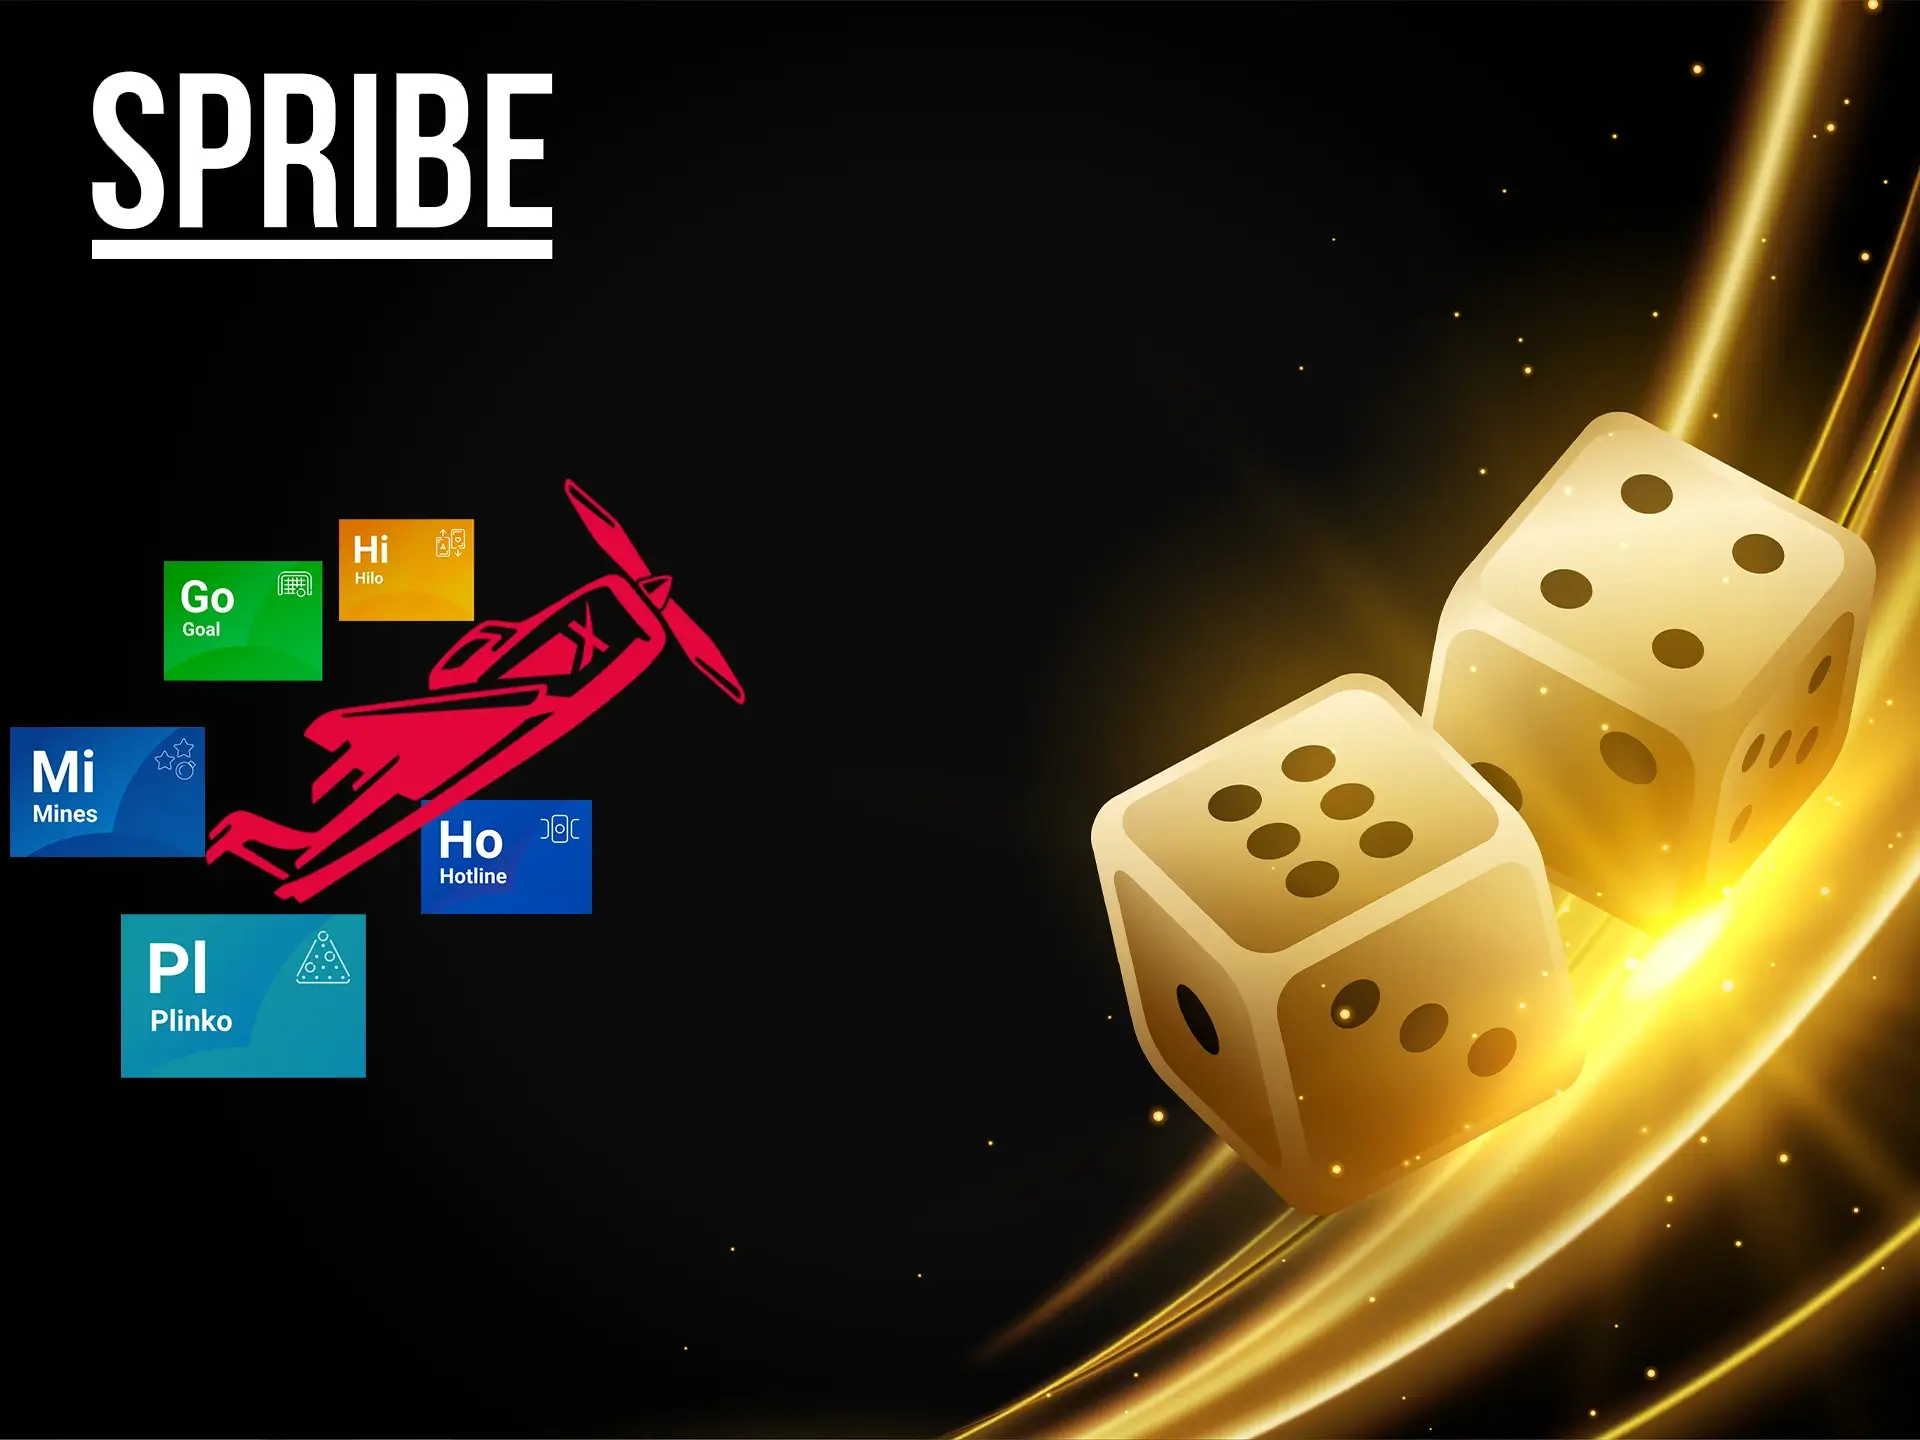 Spribe is a reliable casino provider.